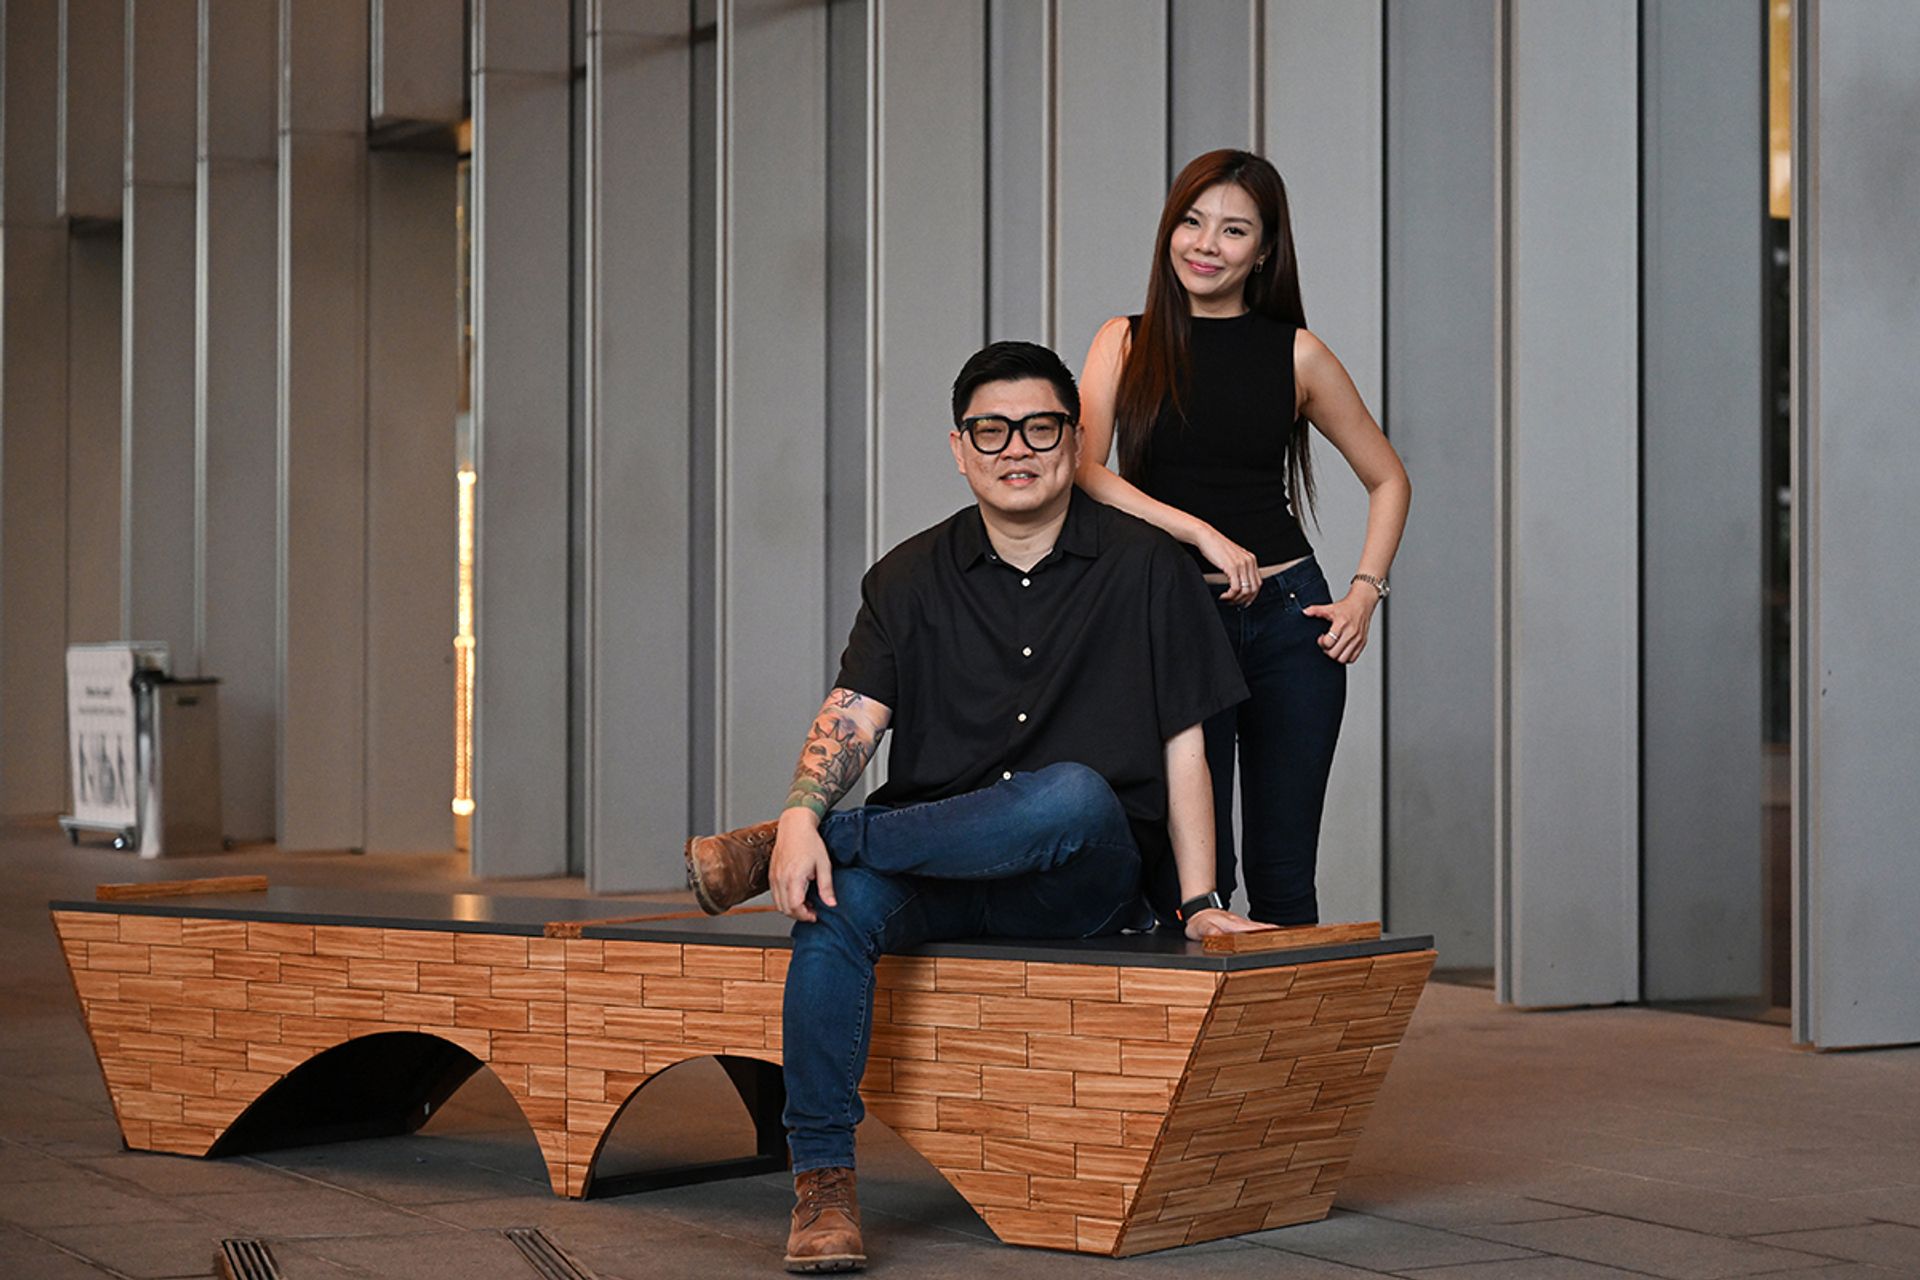 Husband-and-wife duo Justin Lee and Evelyn Hew with a bench ChopValue Singapore made for DUO, an integrated mixed-use development located in the Ophir-Rochor district.